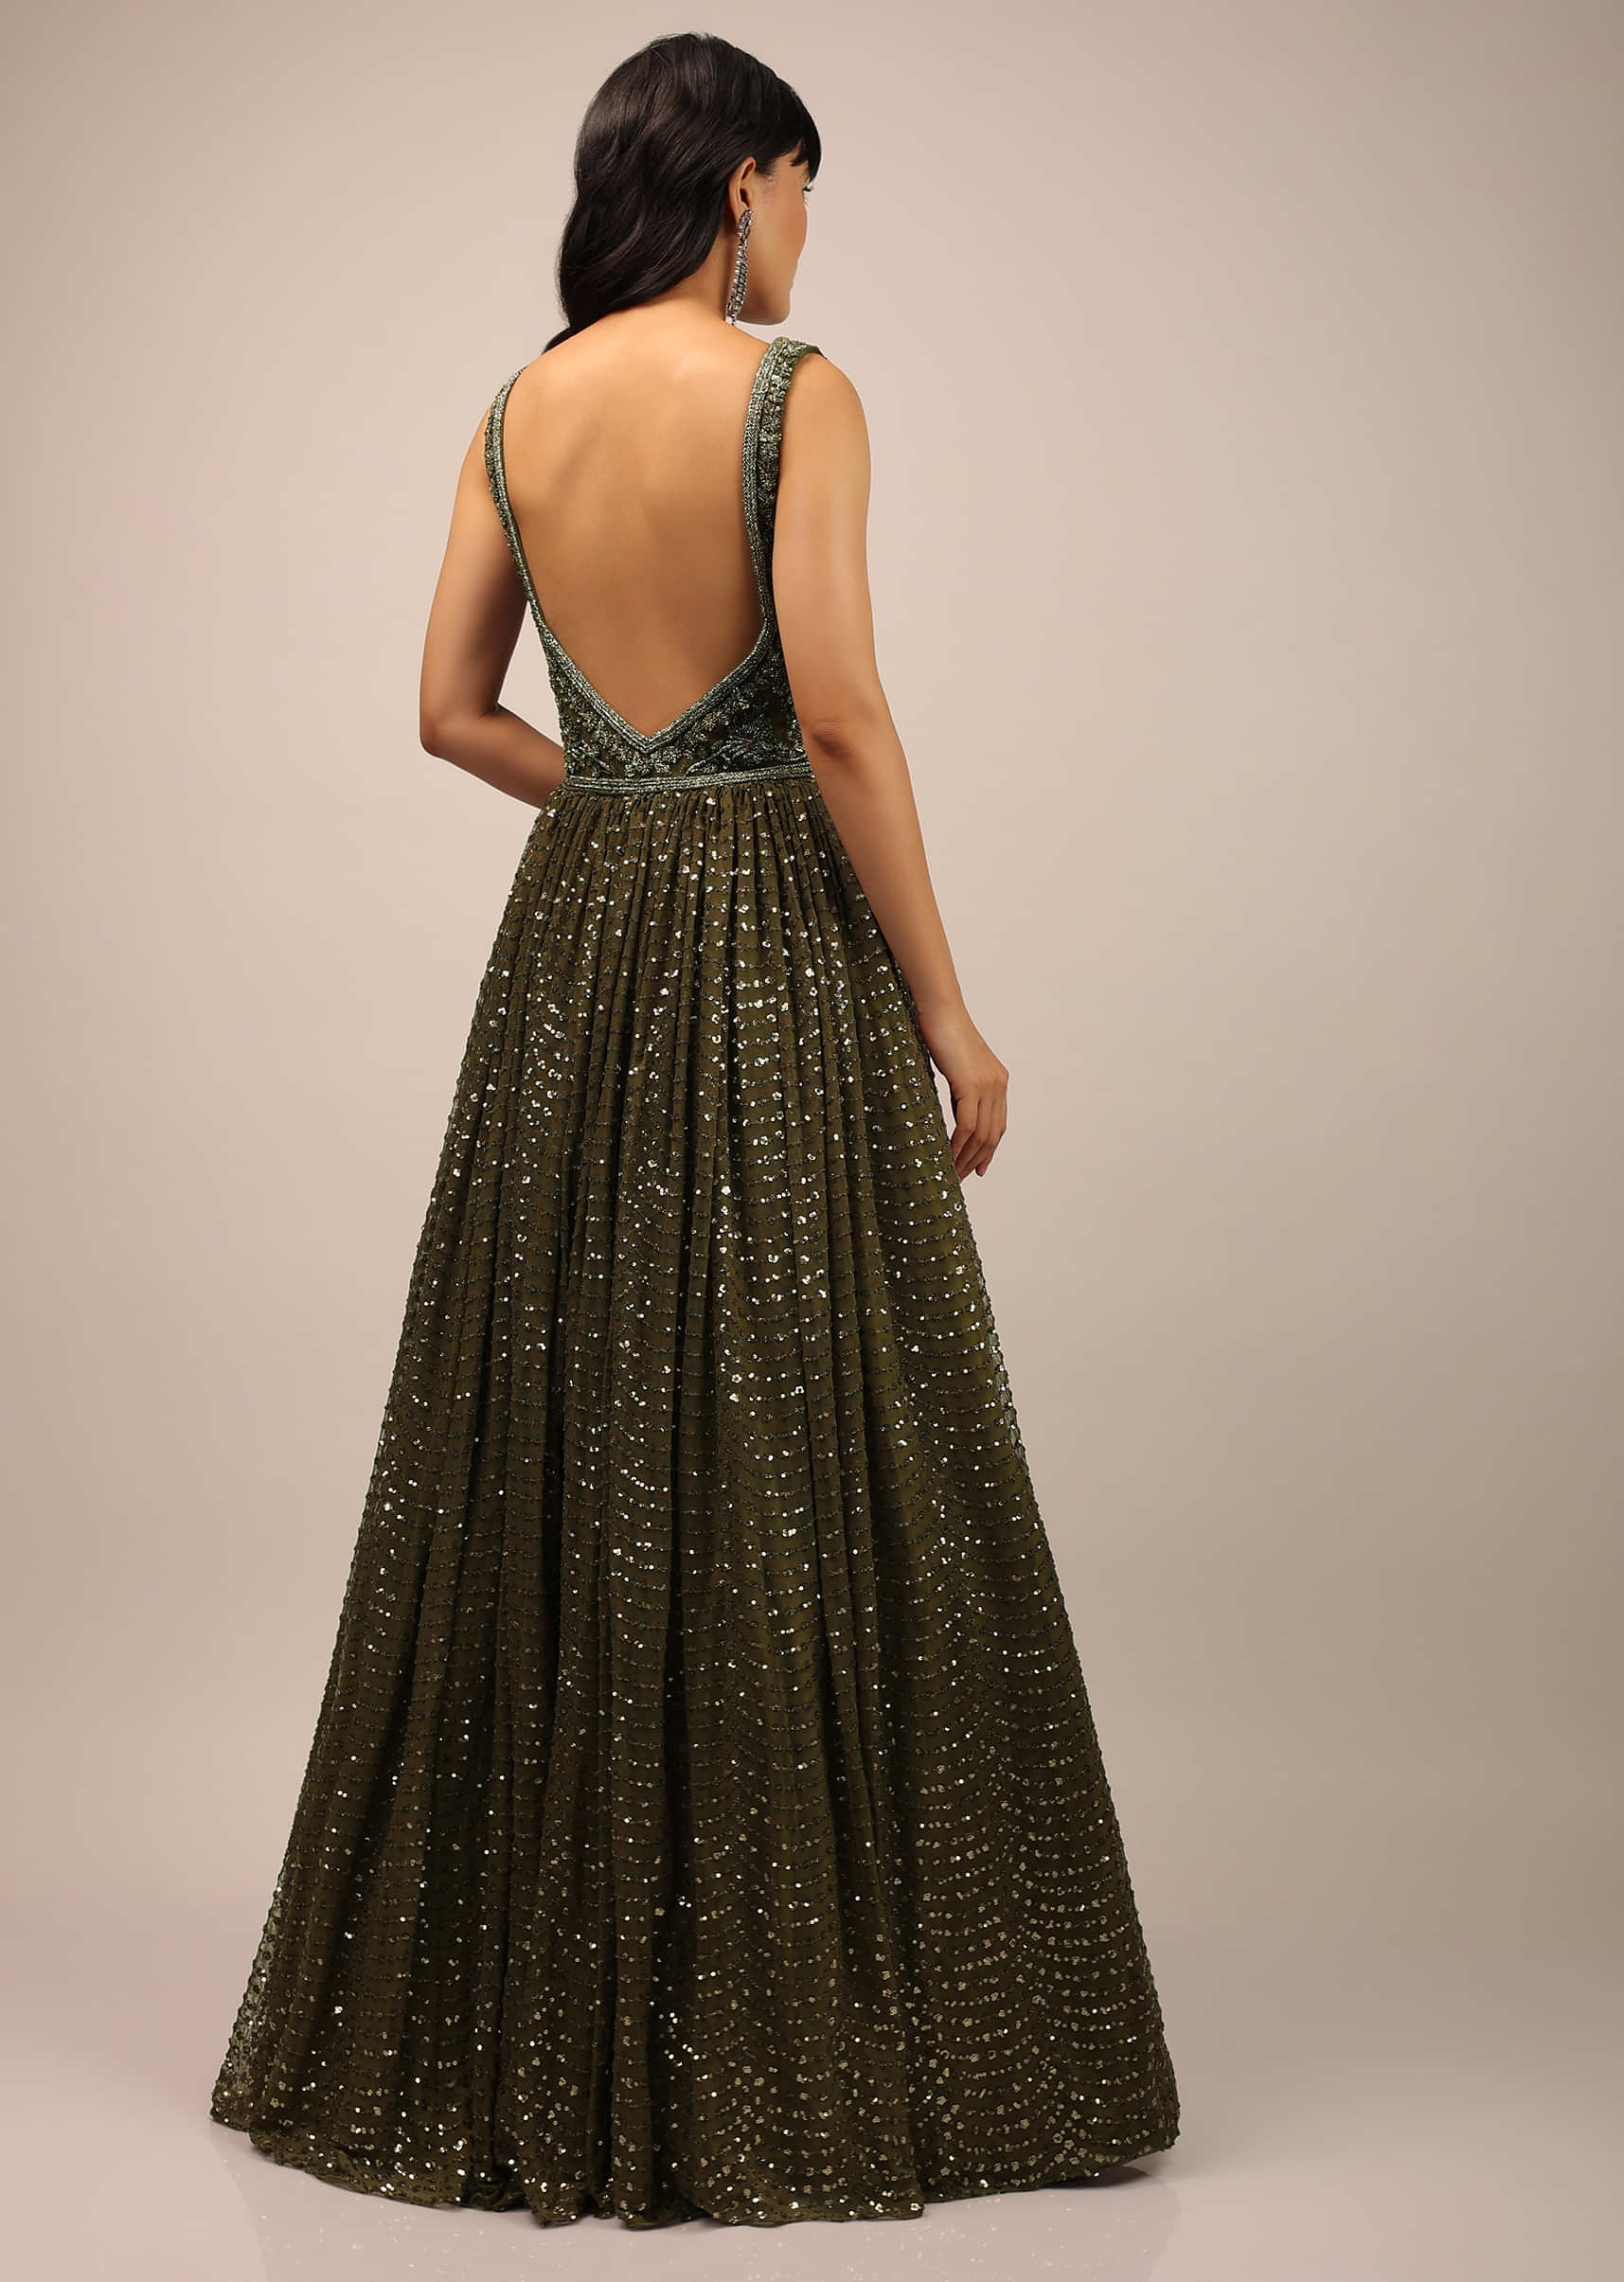 Military Olive Gown With Sequins And A Low Cut On The Back